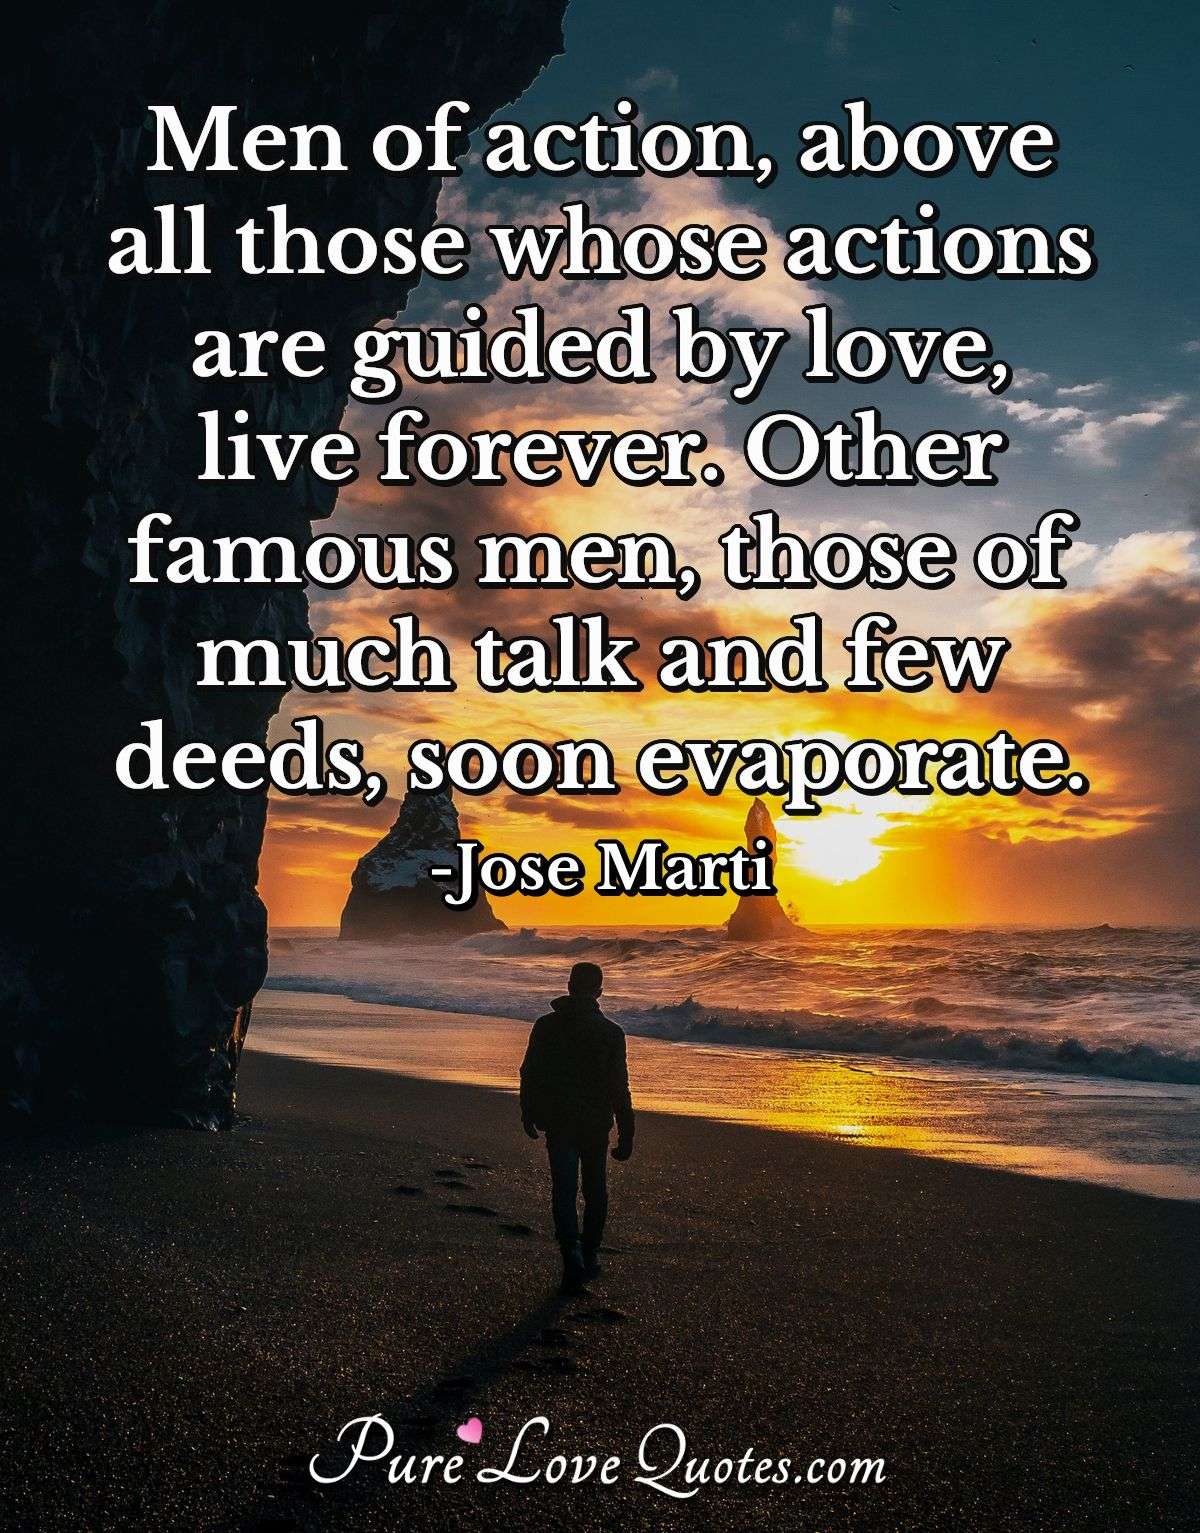 Men of action, above all those whose actions are guided by love, live forever. Other famous men, those of much talk and few deeds, soon evaporate. - Jose Marti